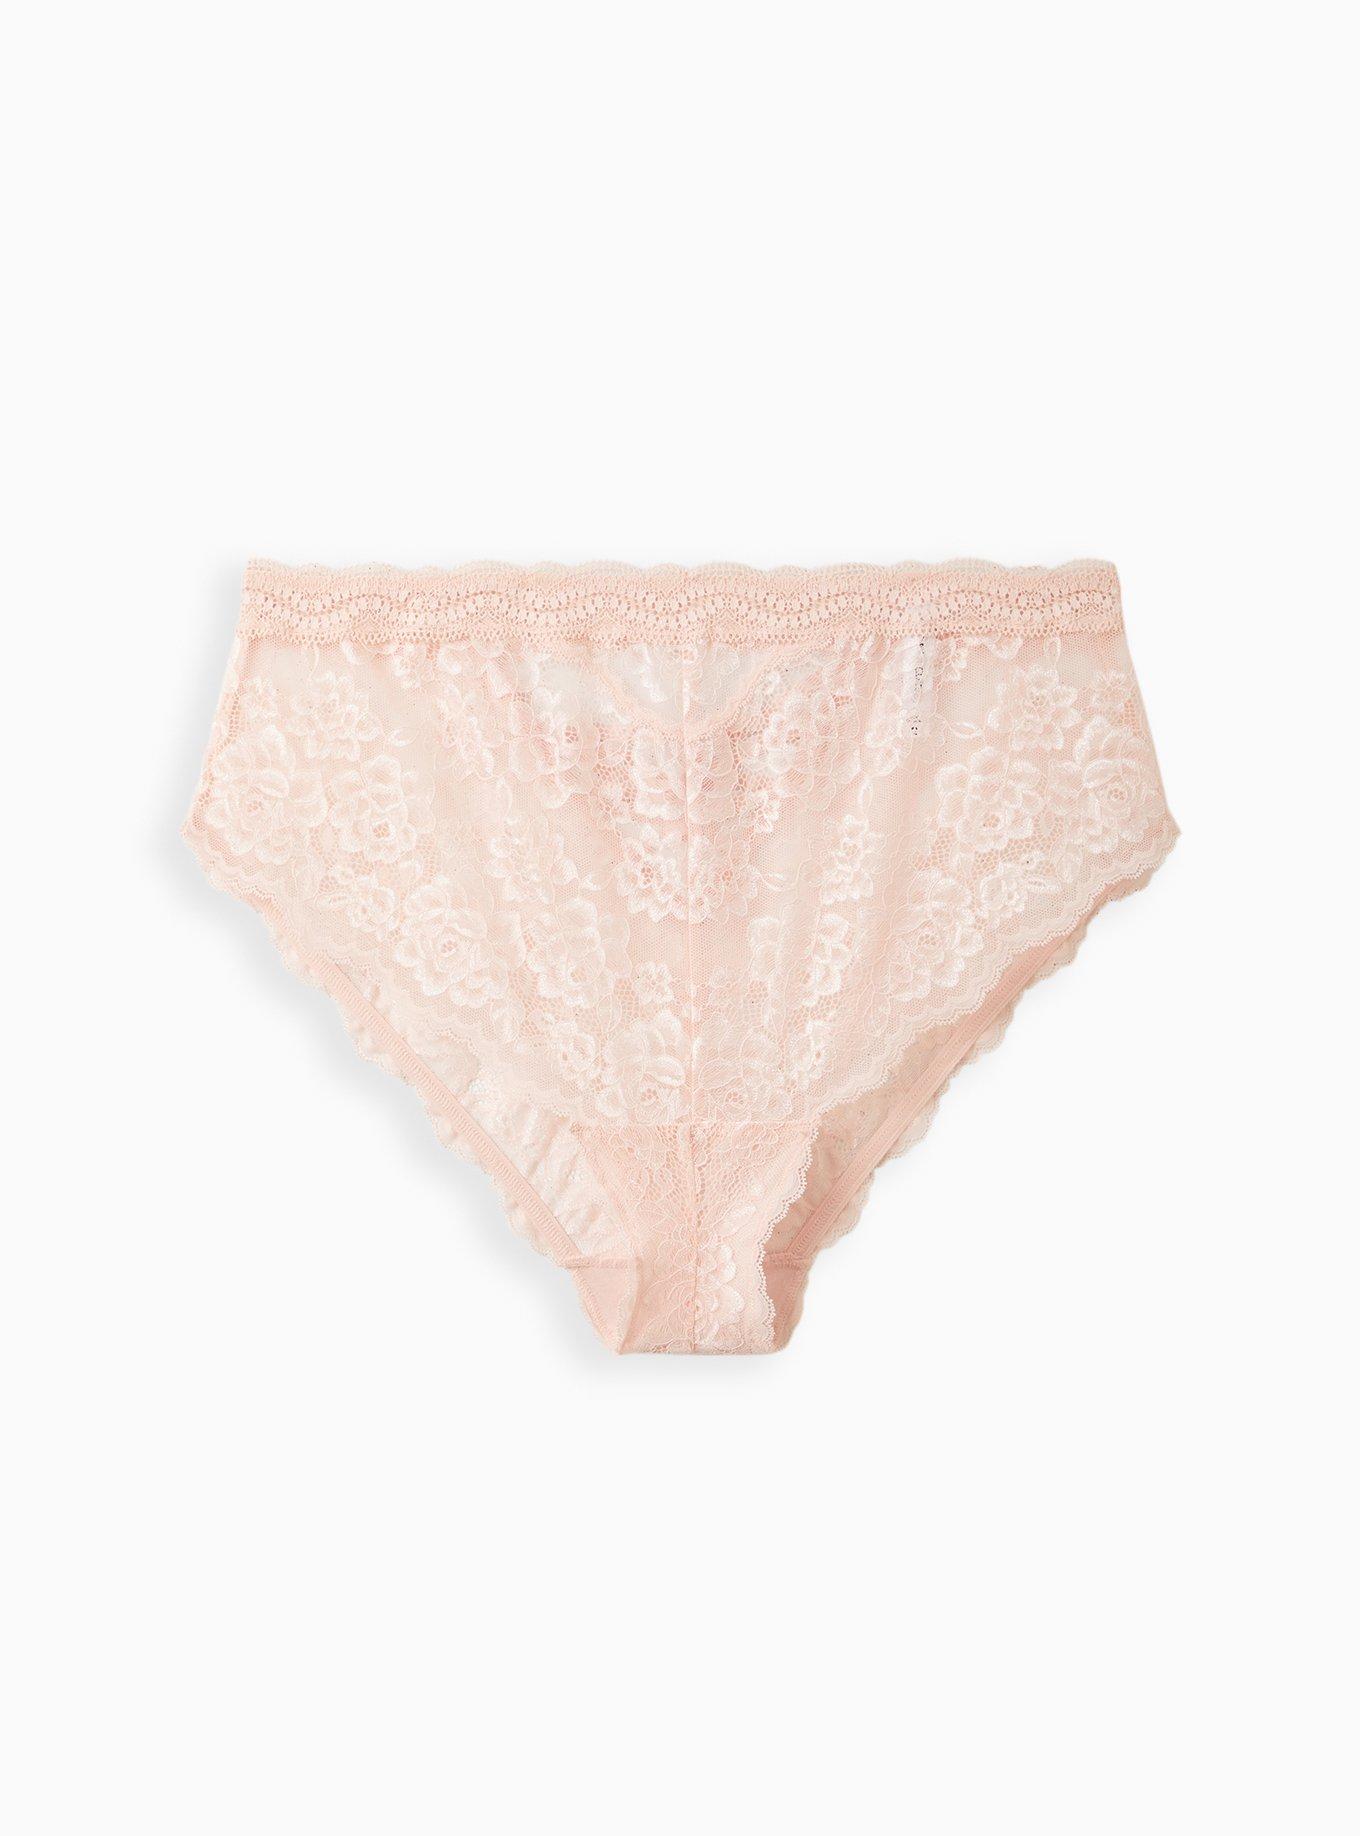 Lace and Mesh Cheeky Panty - Enchanted forest